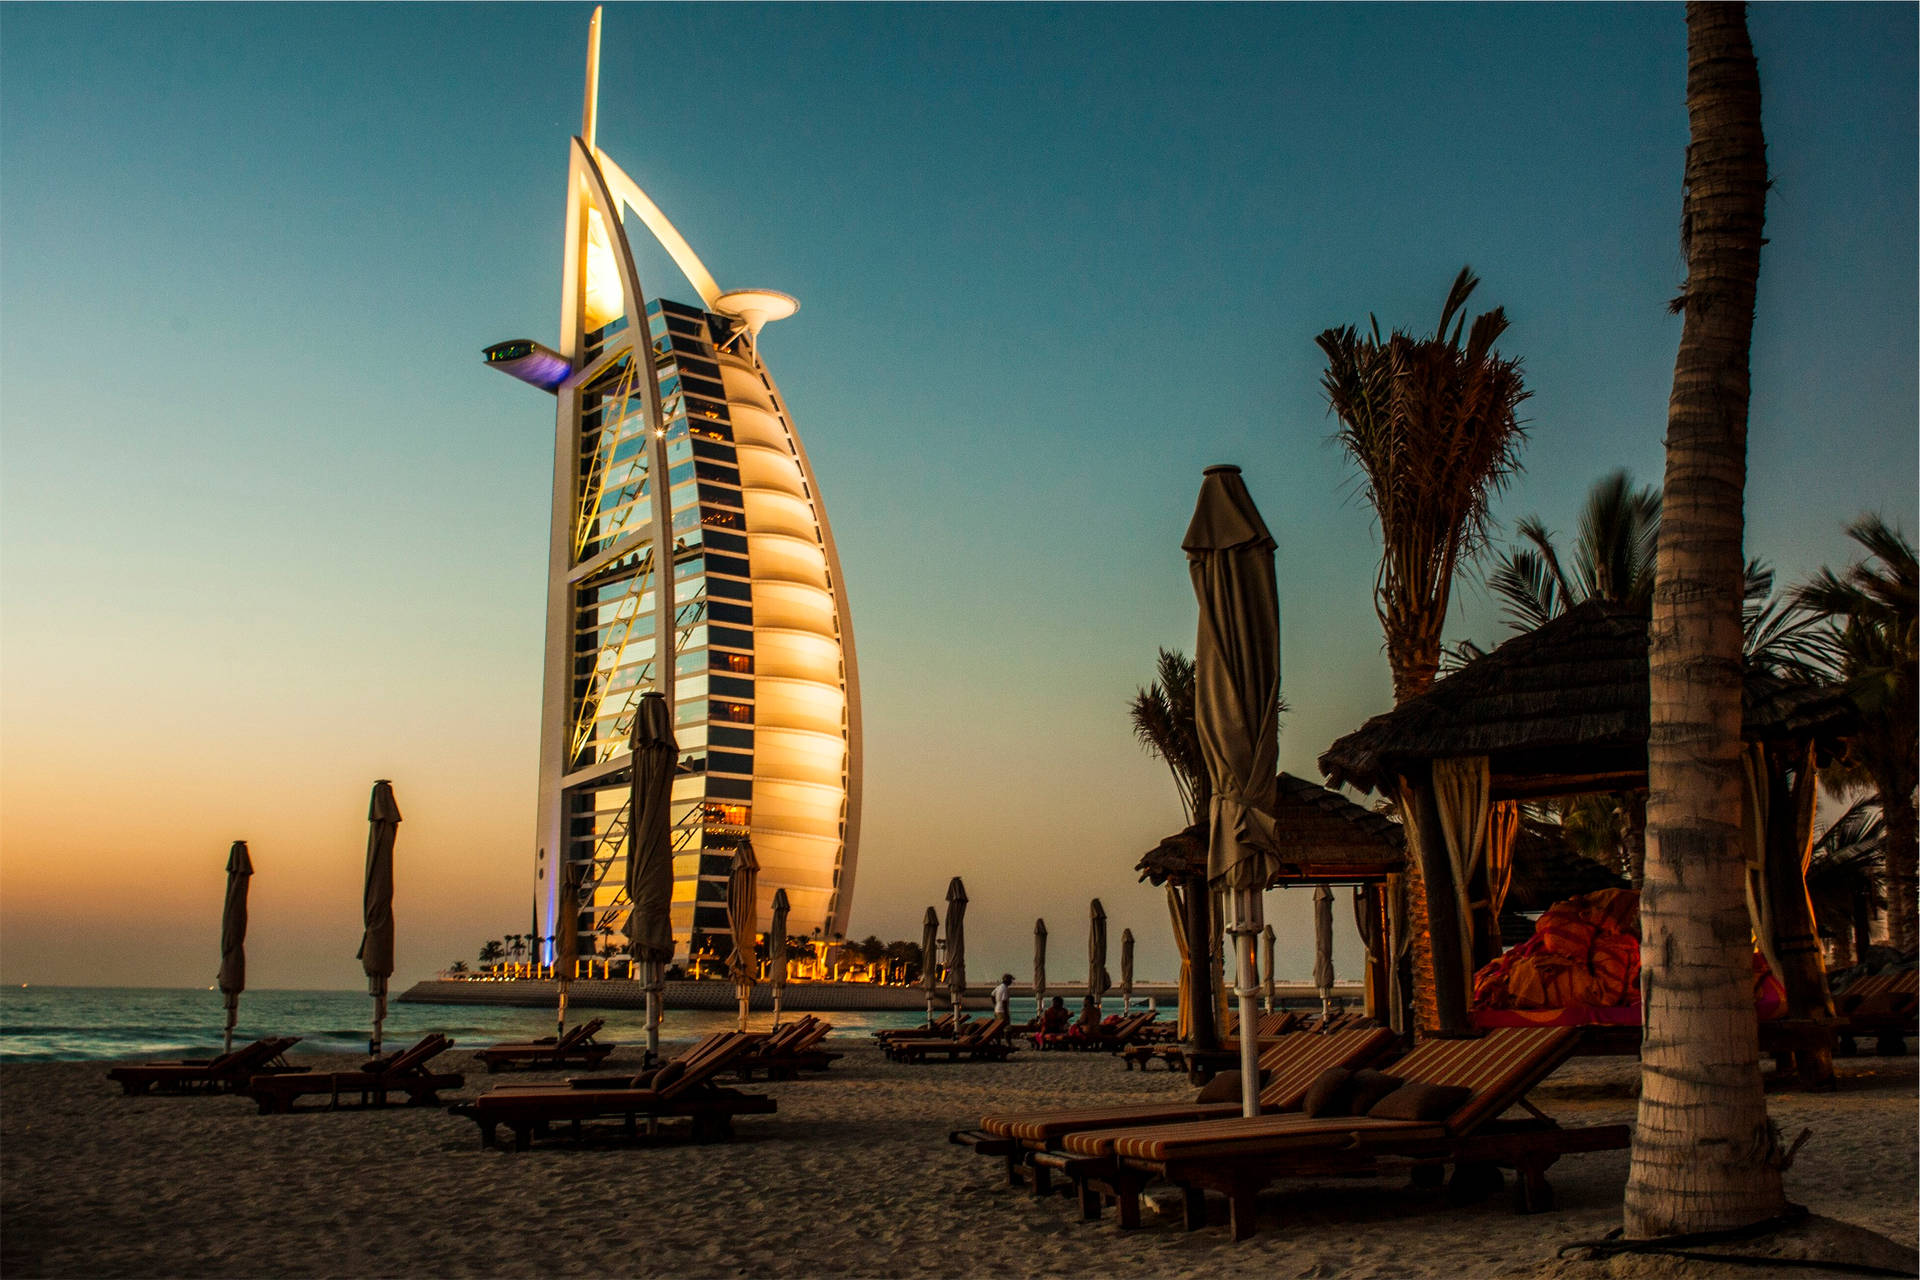 Burjal Arab Vid Stranden. (note: Swedish Does Not Have Articles Like 